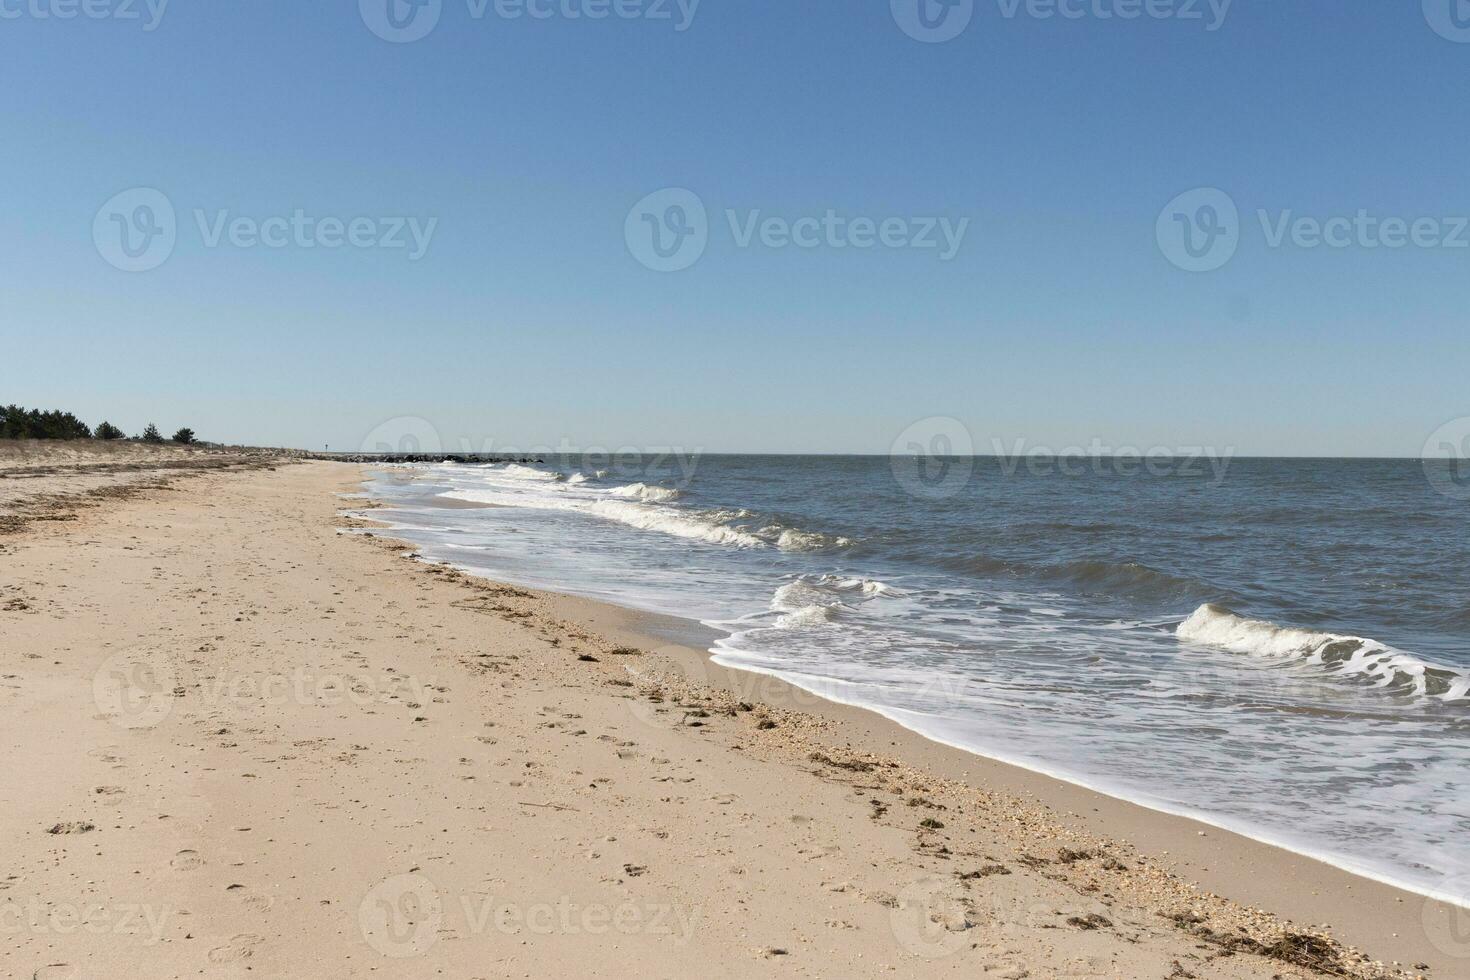 I loved the look of this beach scene as the waves crashed in. The pretty look of the whitecapped surd rushing in to the shore. The sand showing different tone to where the water once was. photo